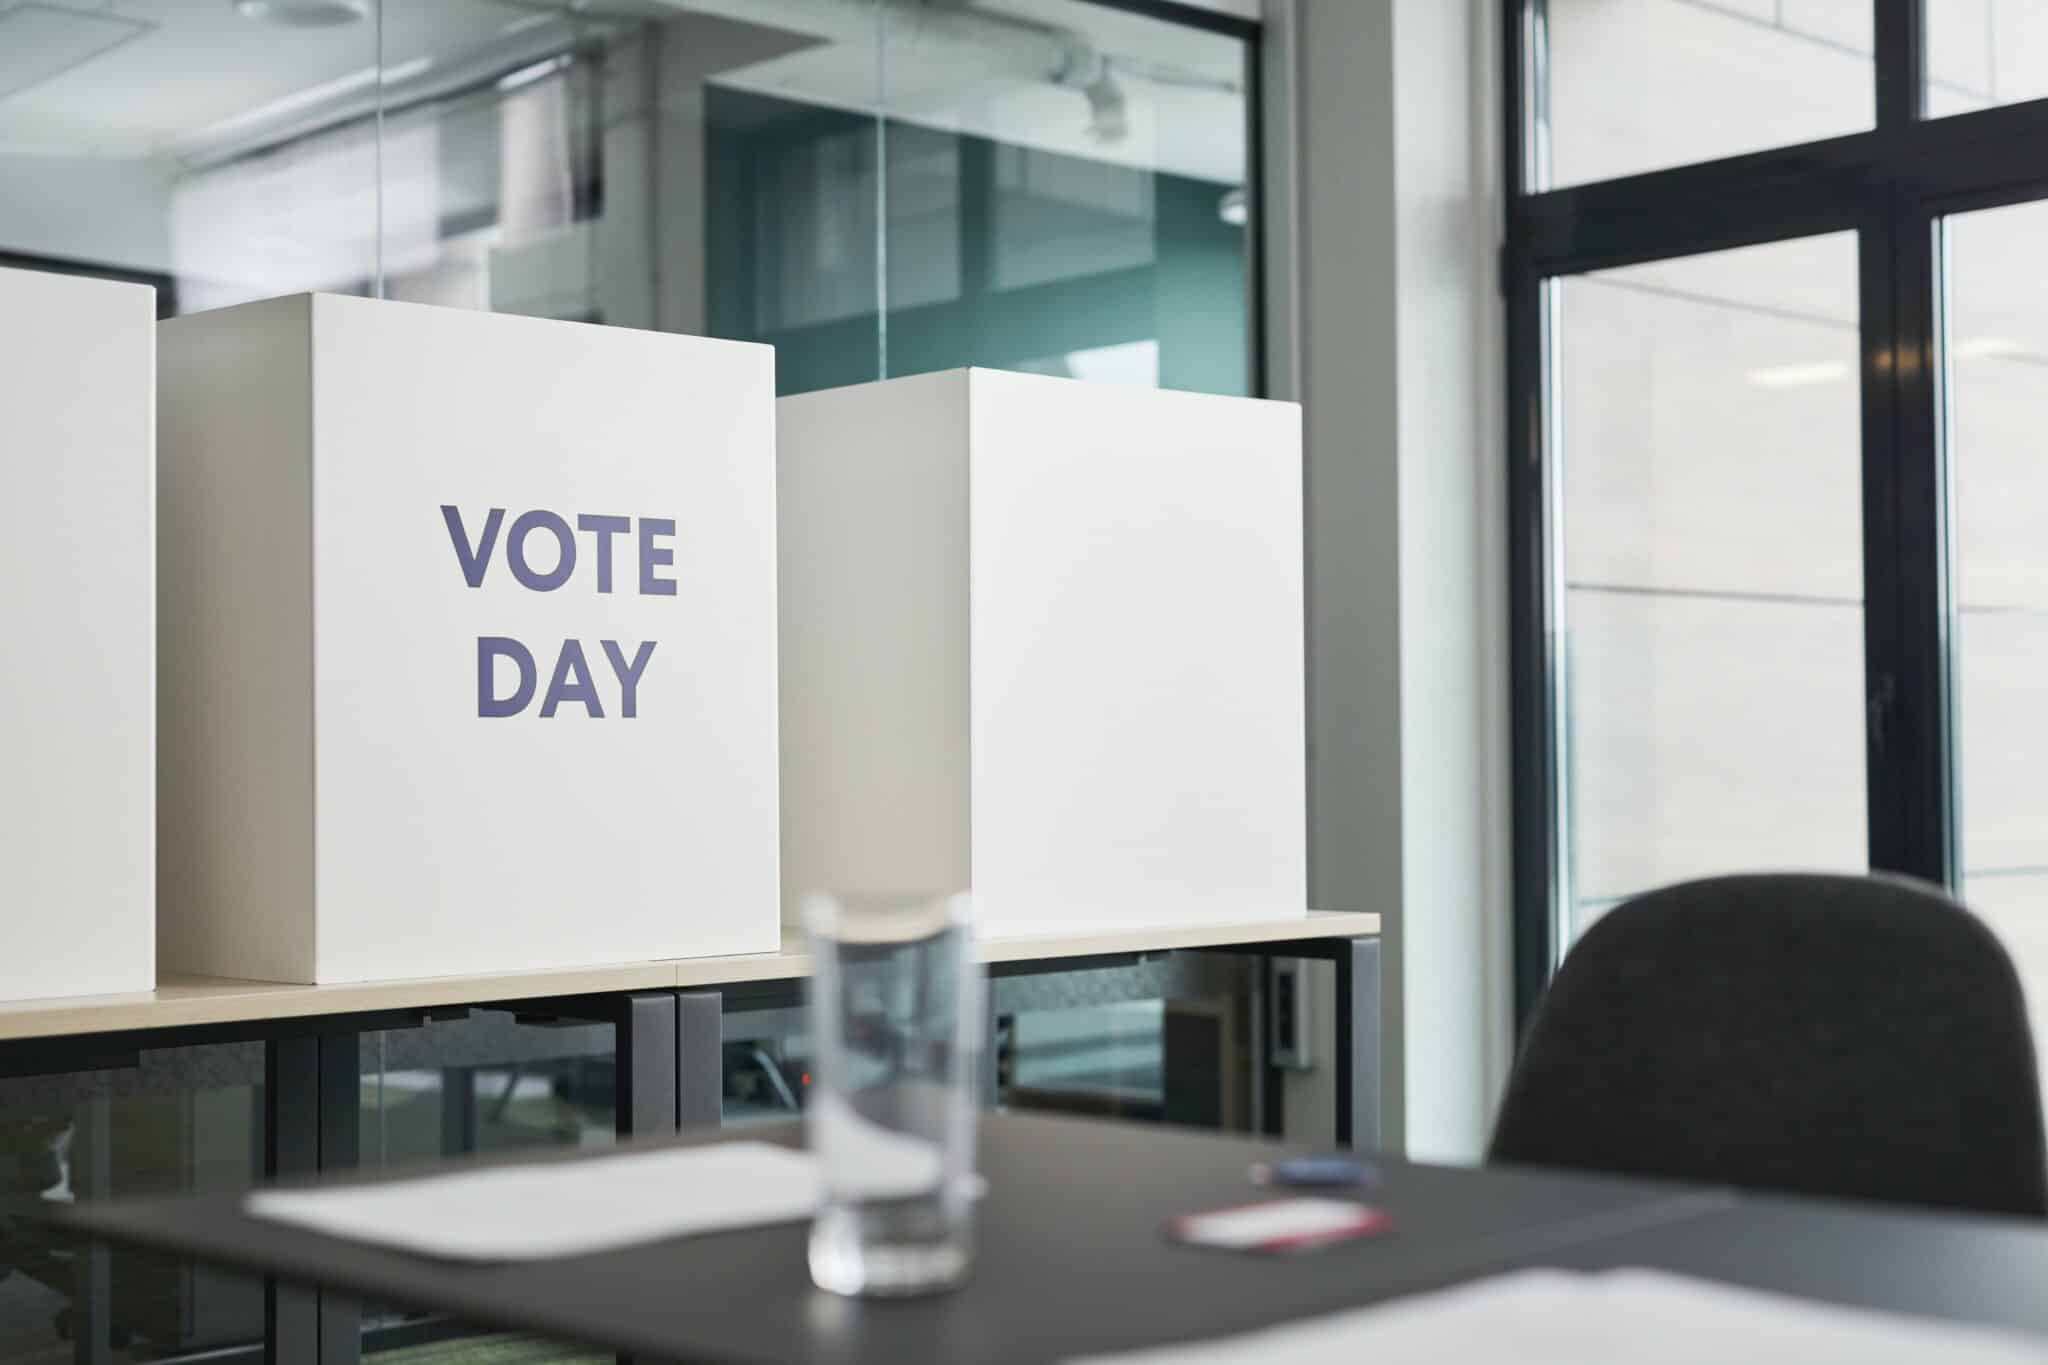 Ilustrasi bilik suara/Photo by Edmond Dantès: https://www.pexels.com/photo/big-boxes-with-a-sign-vote-day-standing-on-table-in-an-office-7103098/